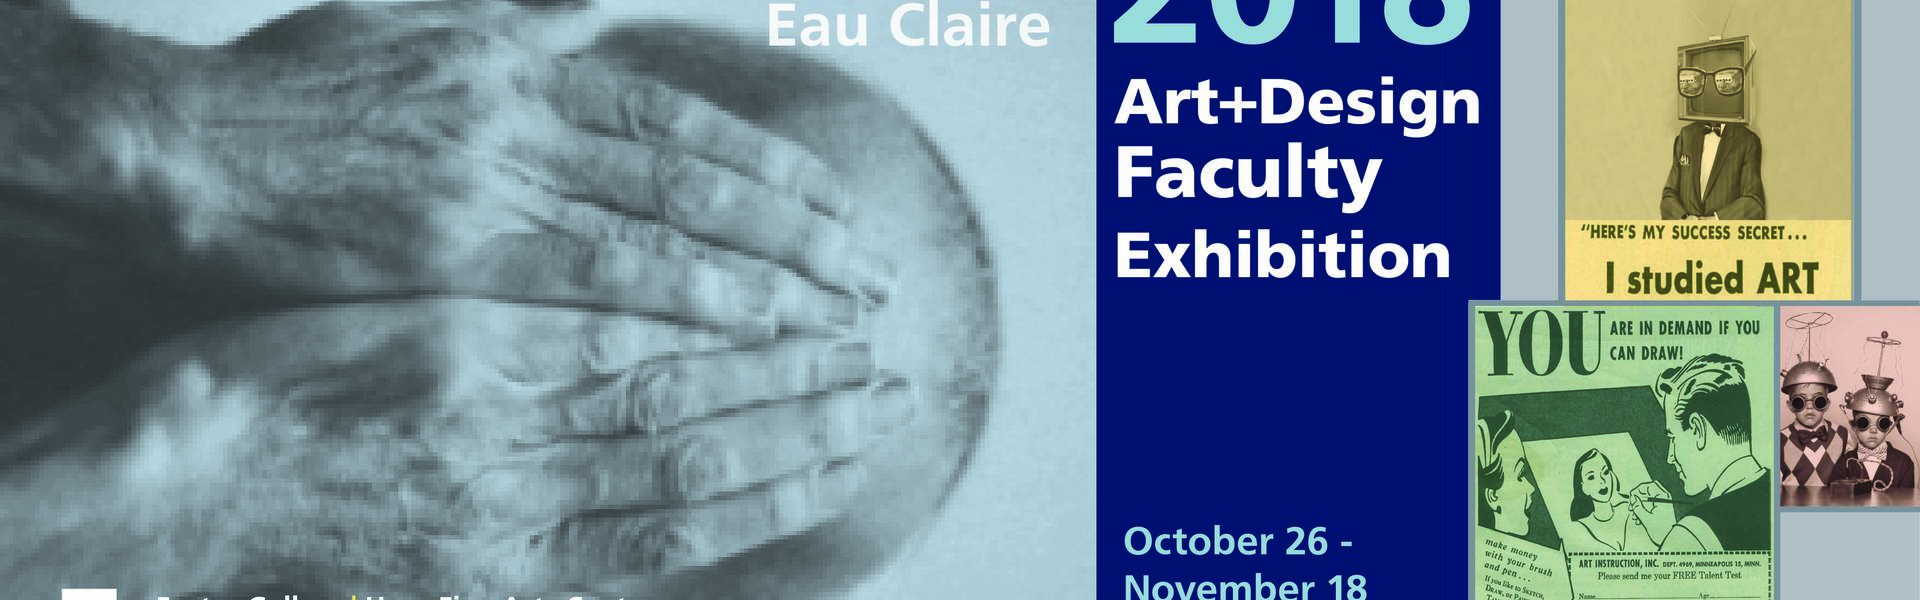 Faculty exhibition banner